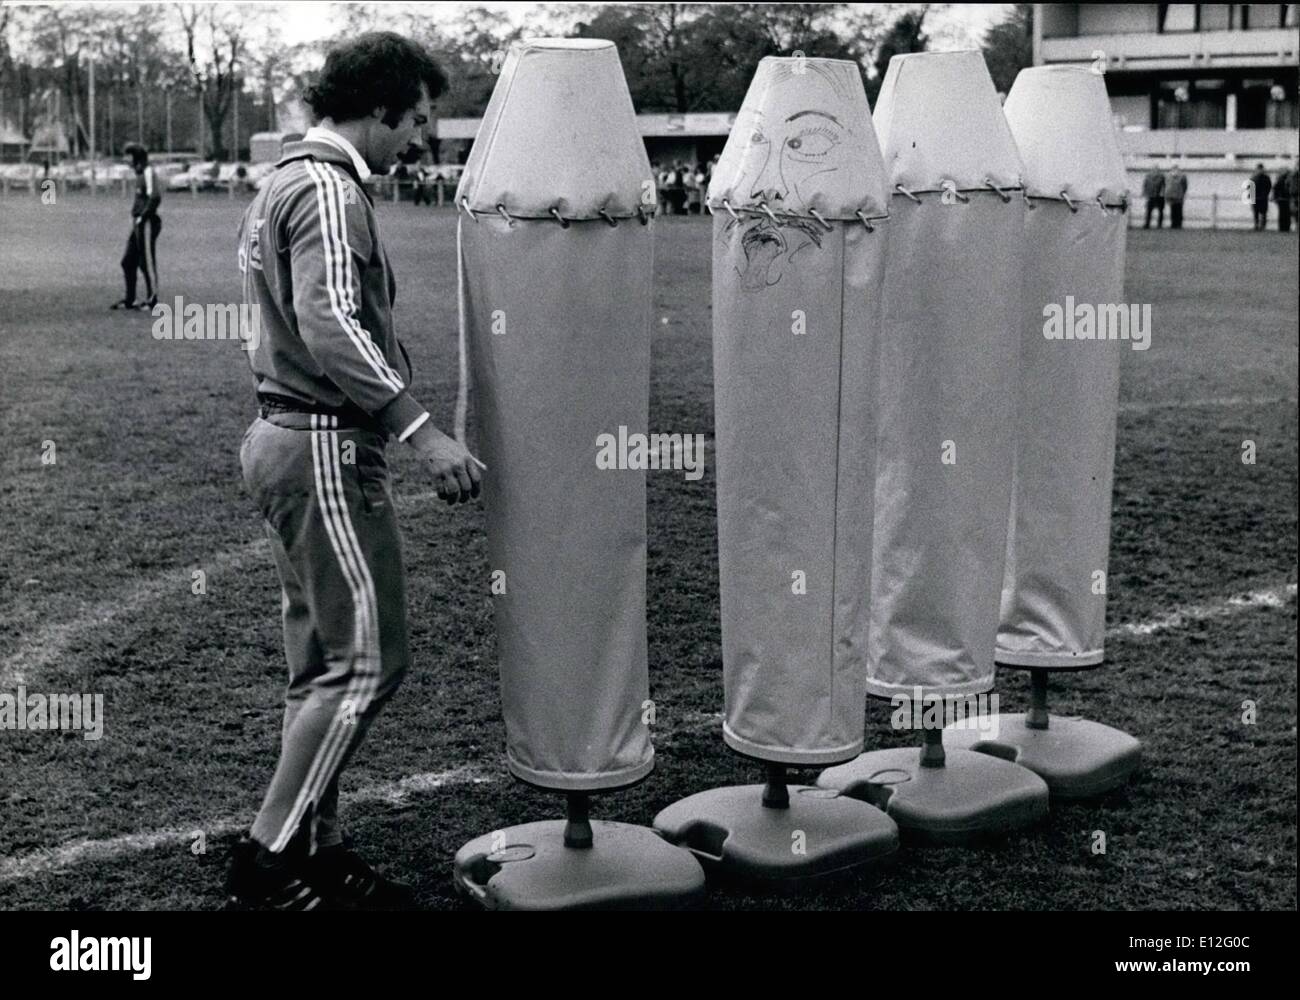 Dec. 26, 2011 - New Training ''Partners'' For ''FC Bayern Munchen'': Soccer star Franz Beckenbauer is taking a close look at the nee ''antagonists'' of his club. The four dummies, rubber sacks filled with sand, are the new training helps, they symbolize the ''wall'' during the free kick training. They were invented by a former German soccer trainer and are said to be specially resistant, even against the smashing shots of ''the emperor'' Franz Beckenbauer. Stock Photo